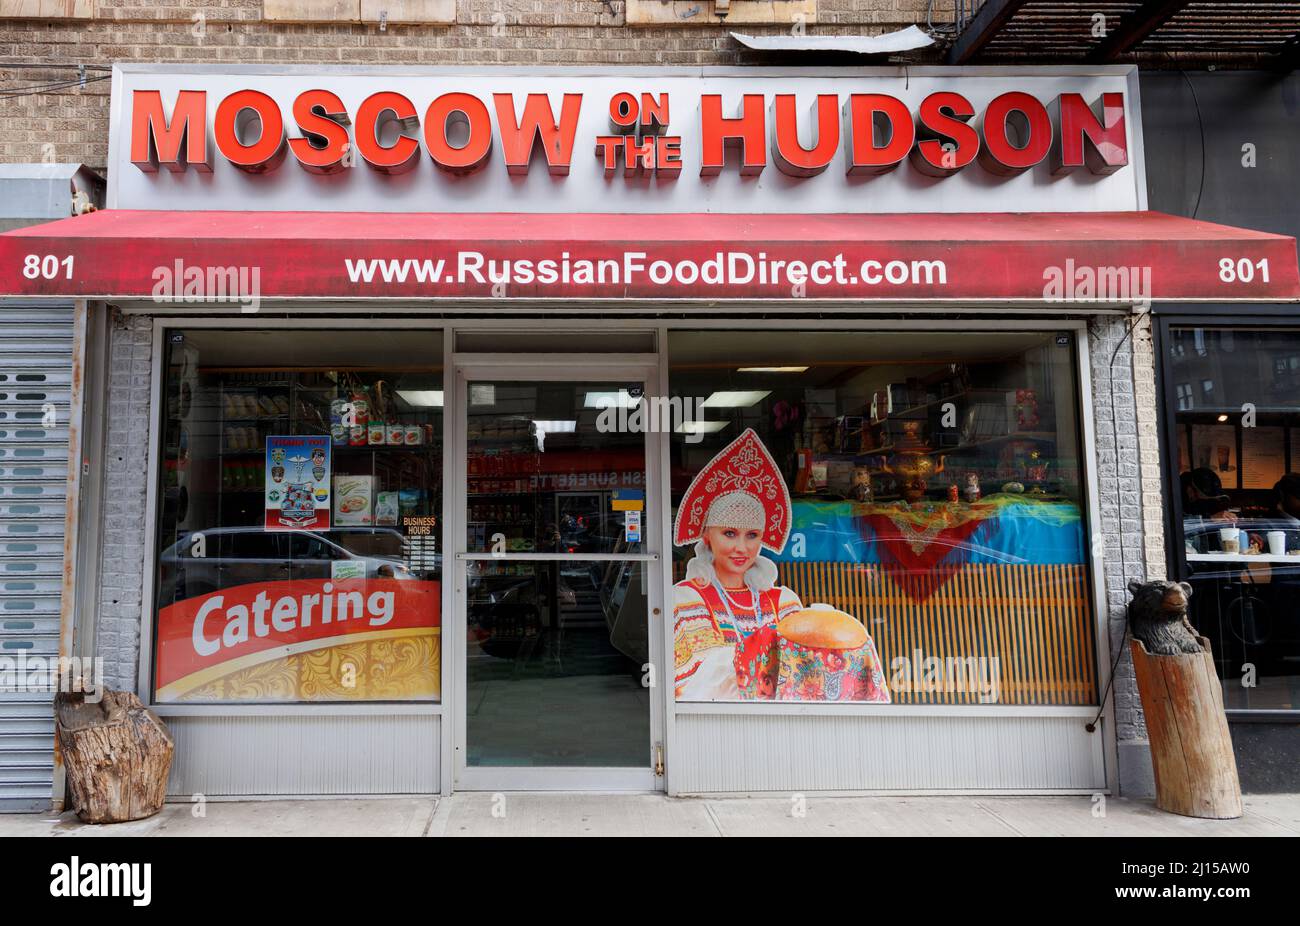 Moscow on the Hudson, a Russian food store located on 181st st. in the Washington Heights section of Northern Manhattan, New York City Stock Photo